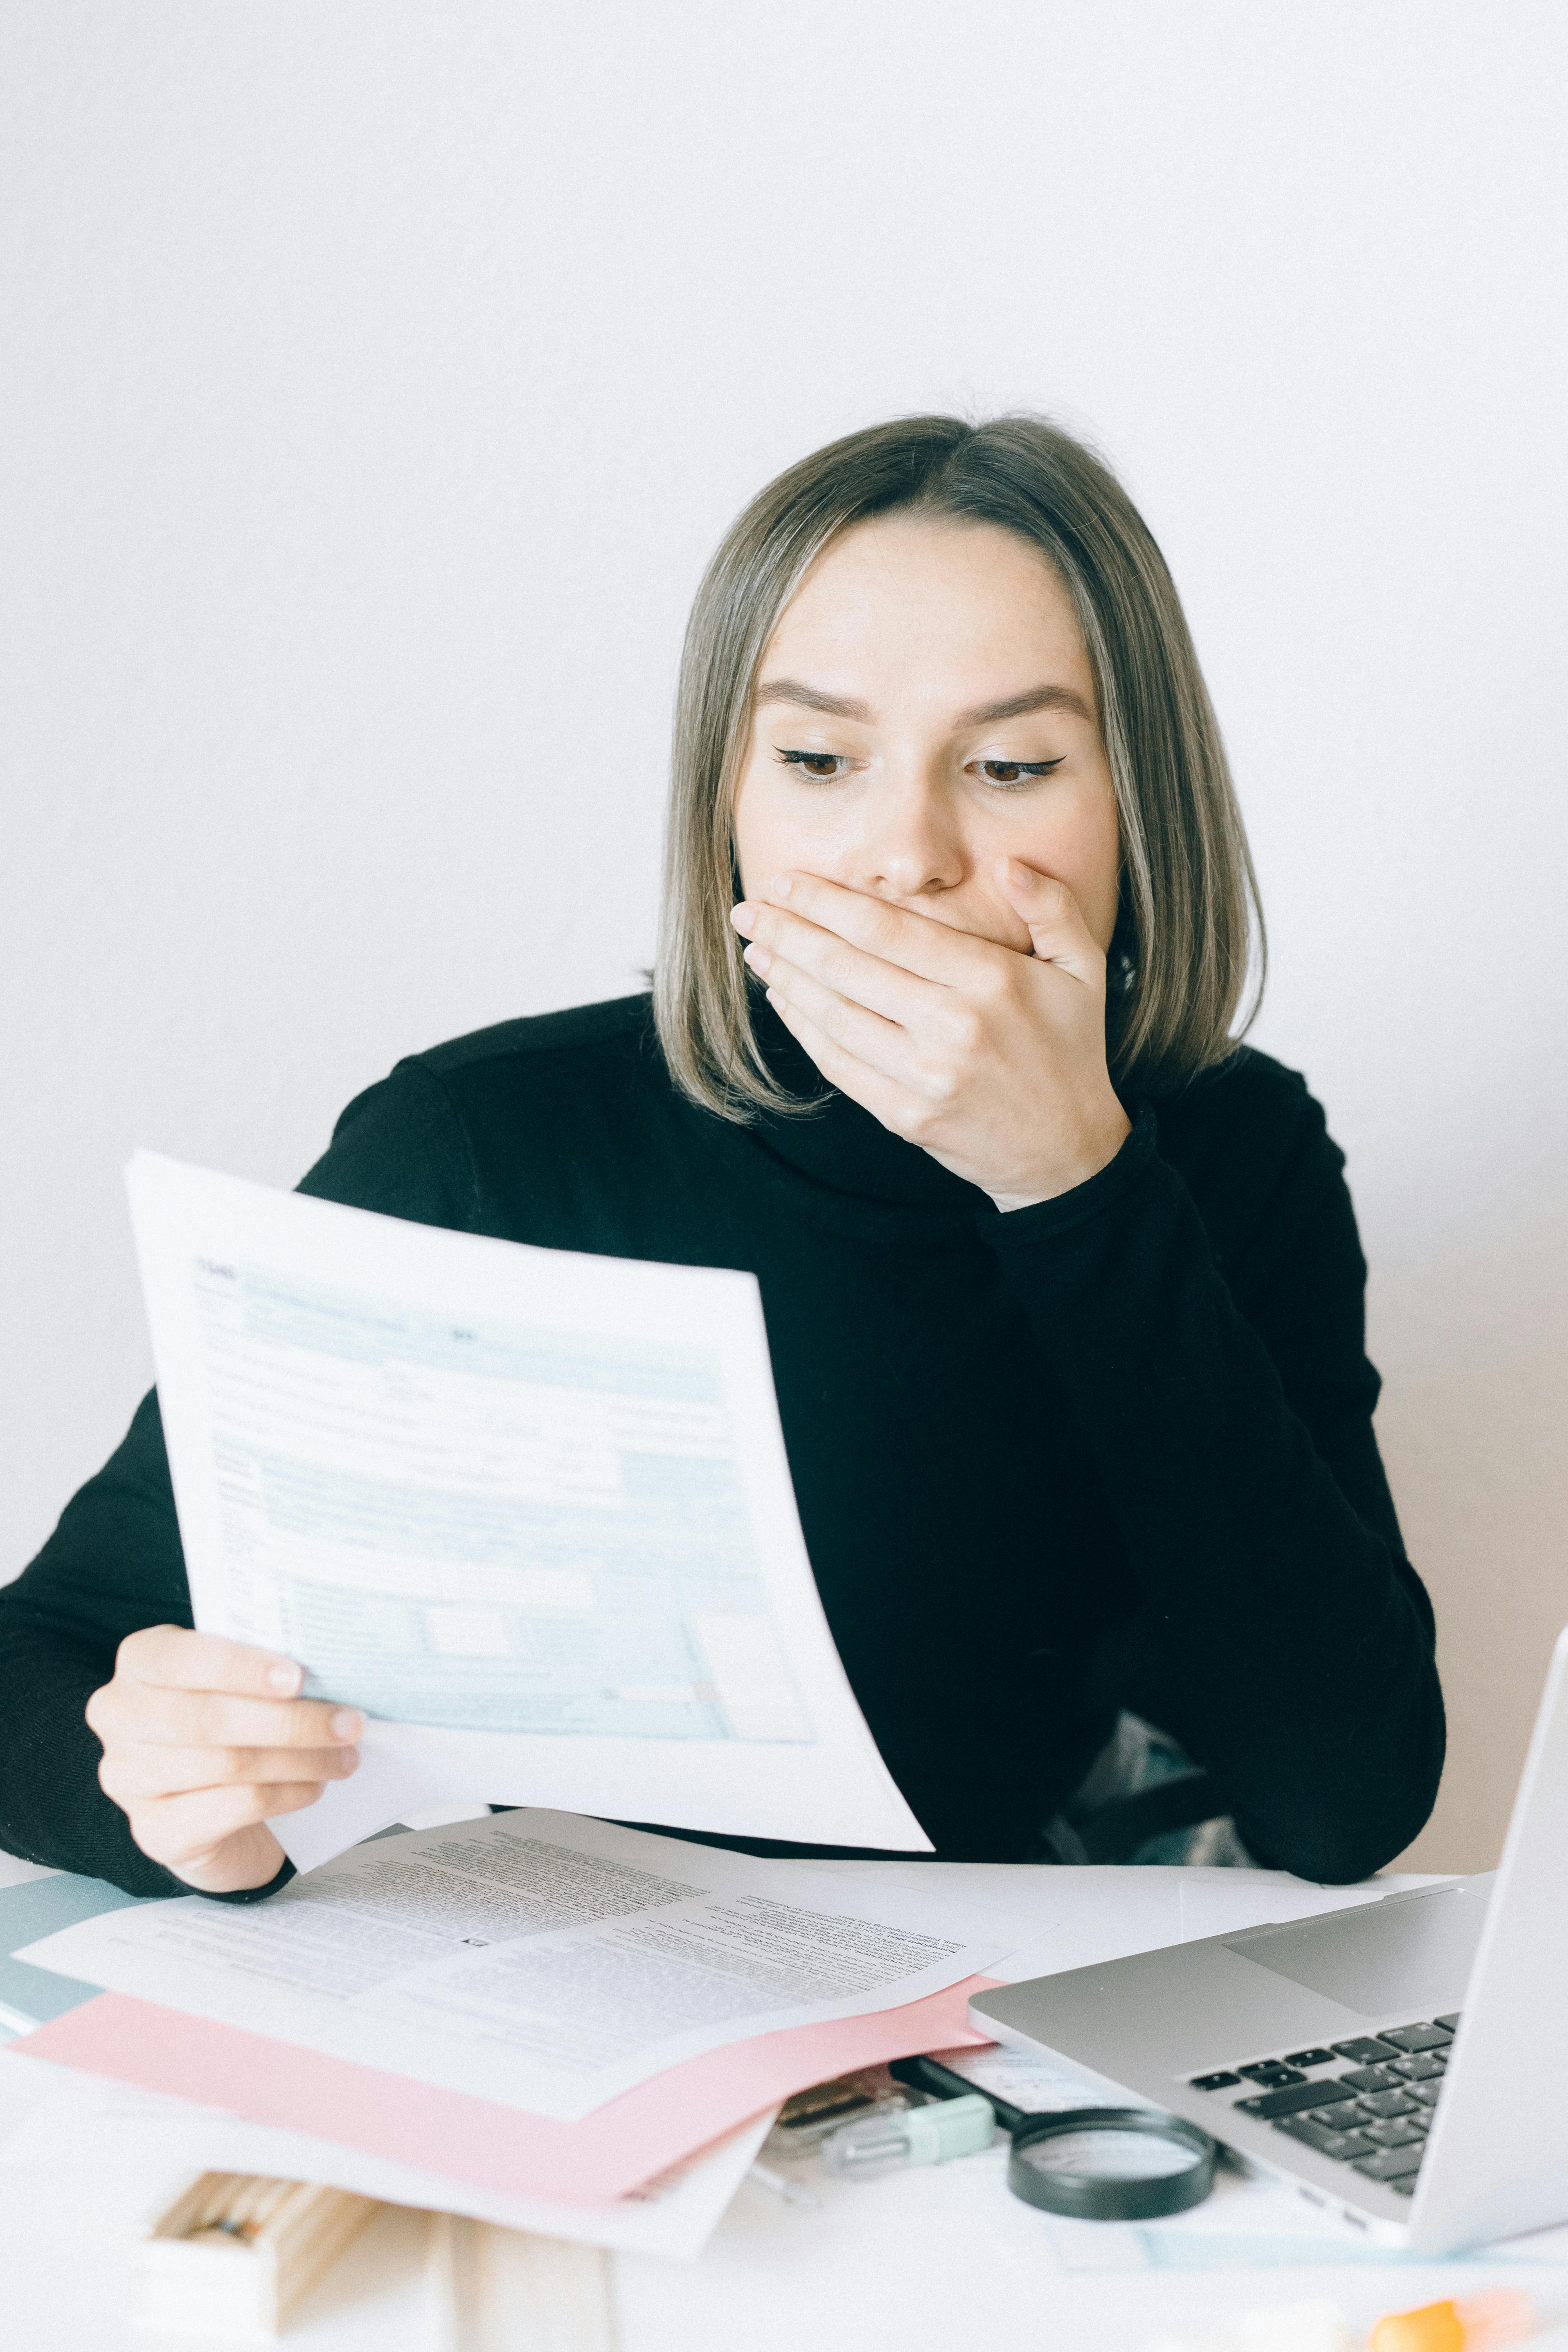 A shocked woman holding a document | Source: Pexels